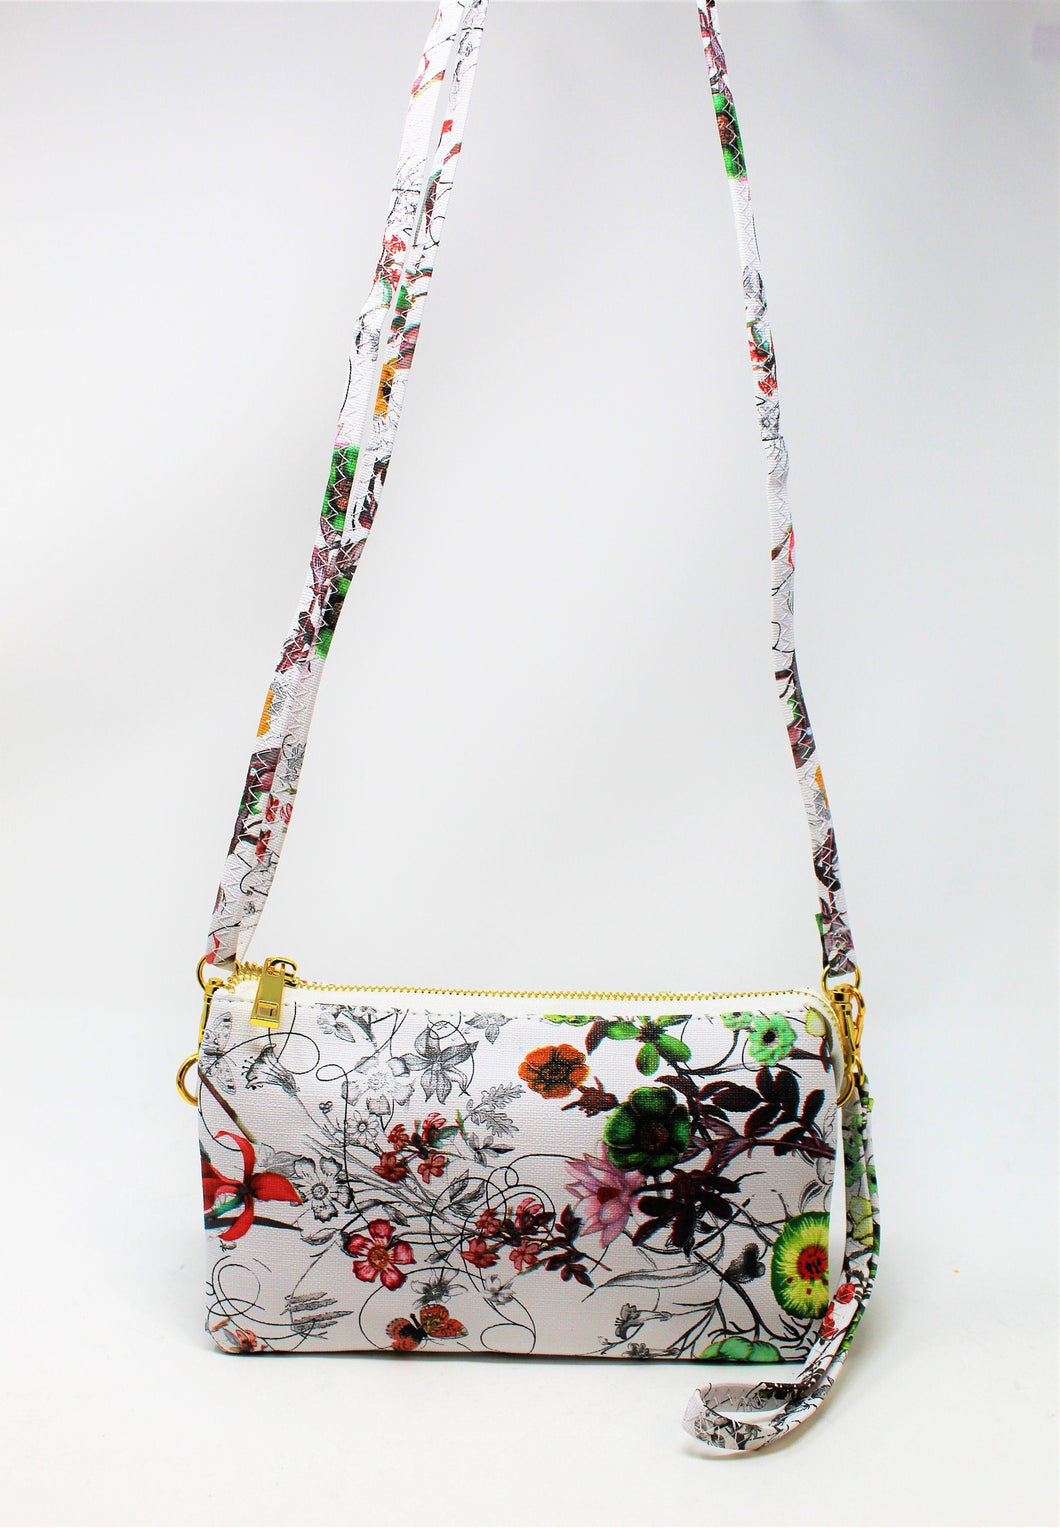 White Printed Wrist-let bag | Long straps | Compact | Trendy/Stylish Collection